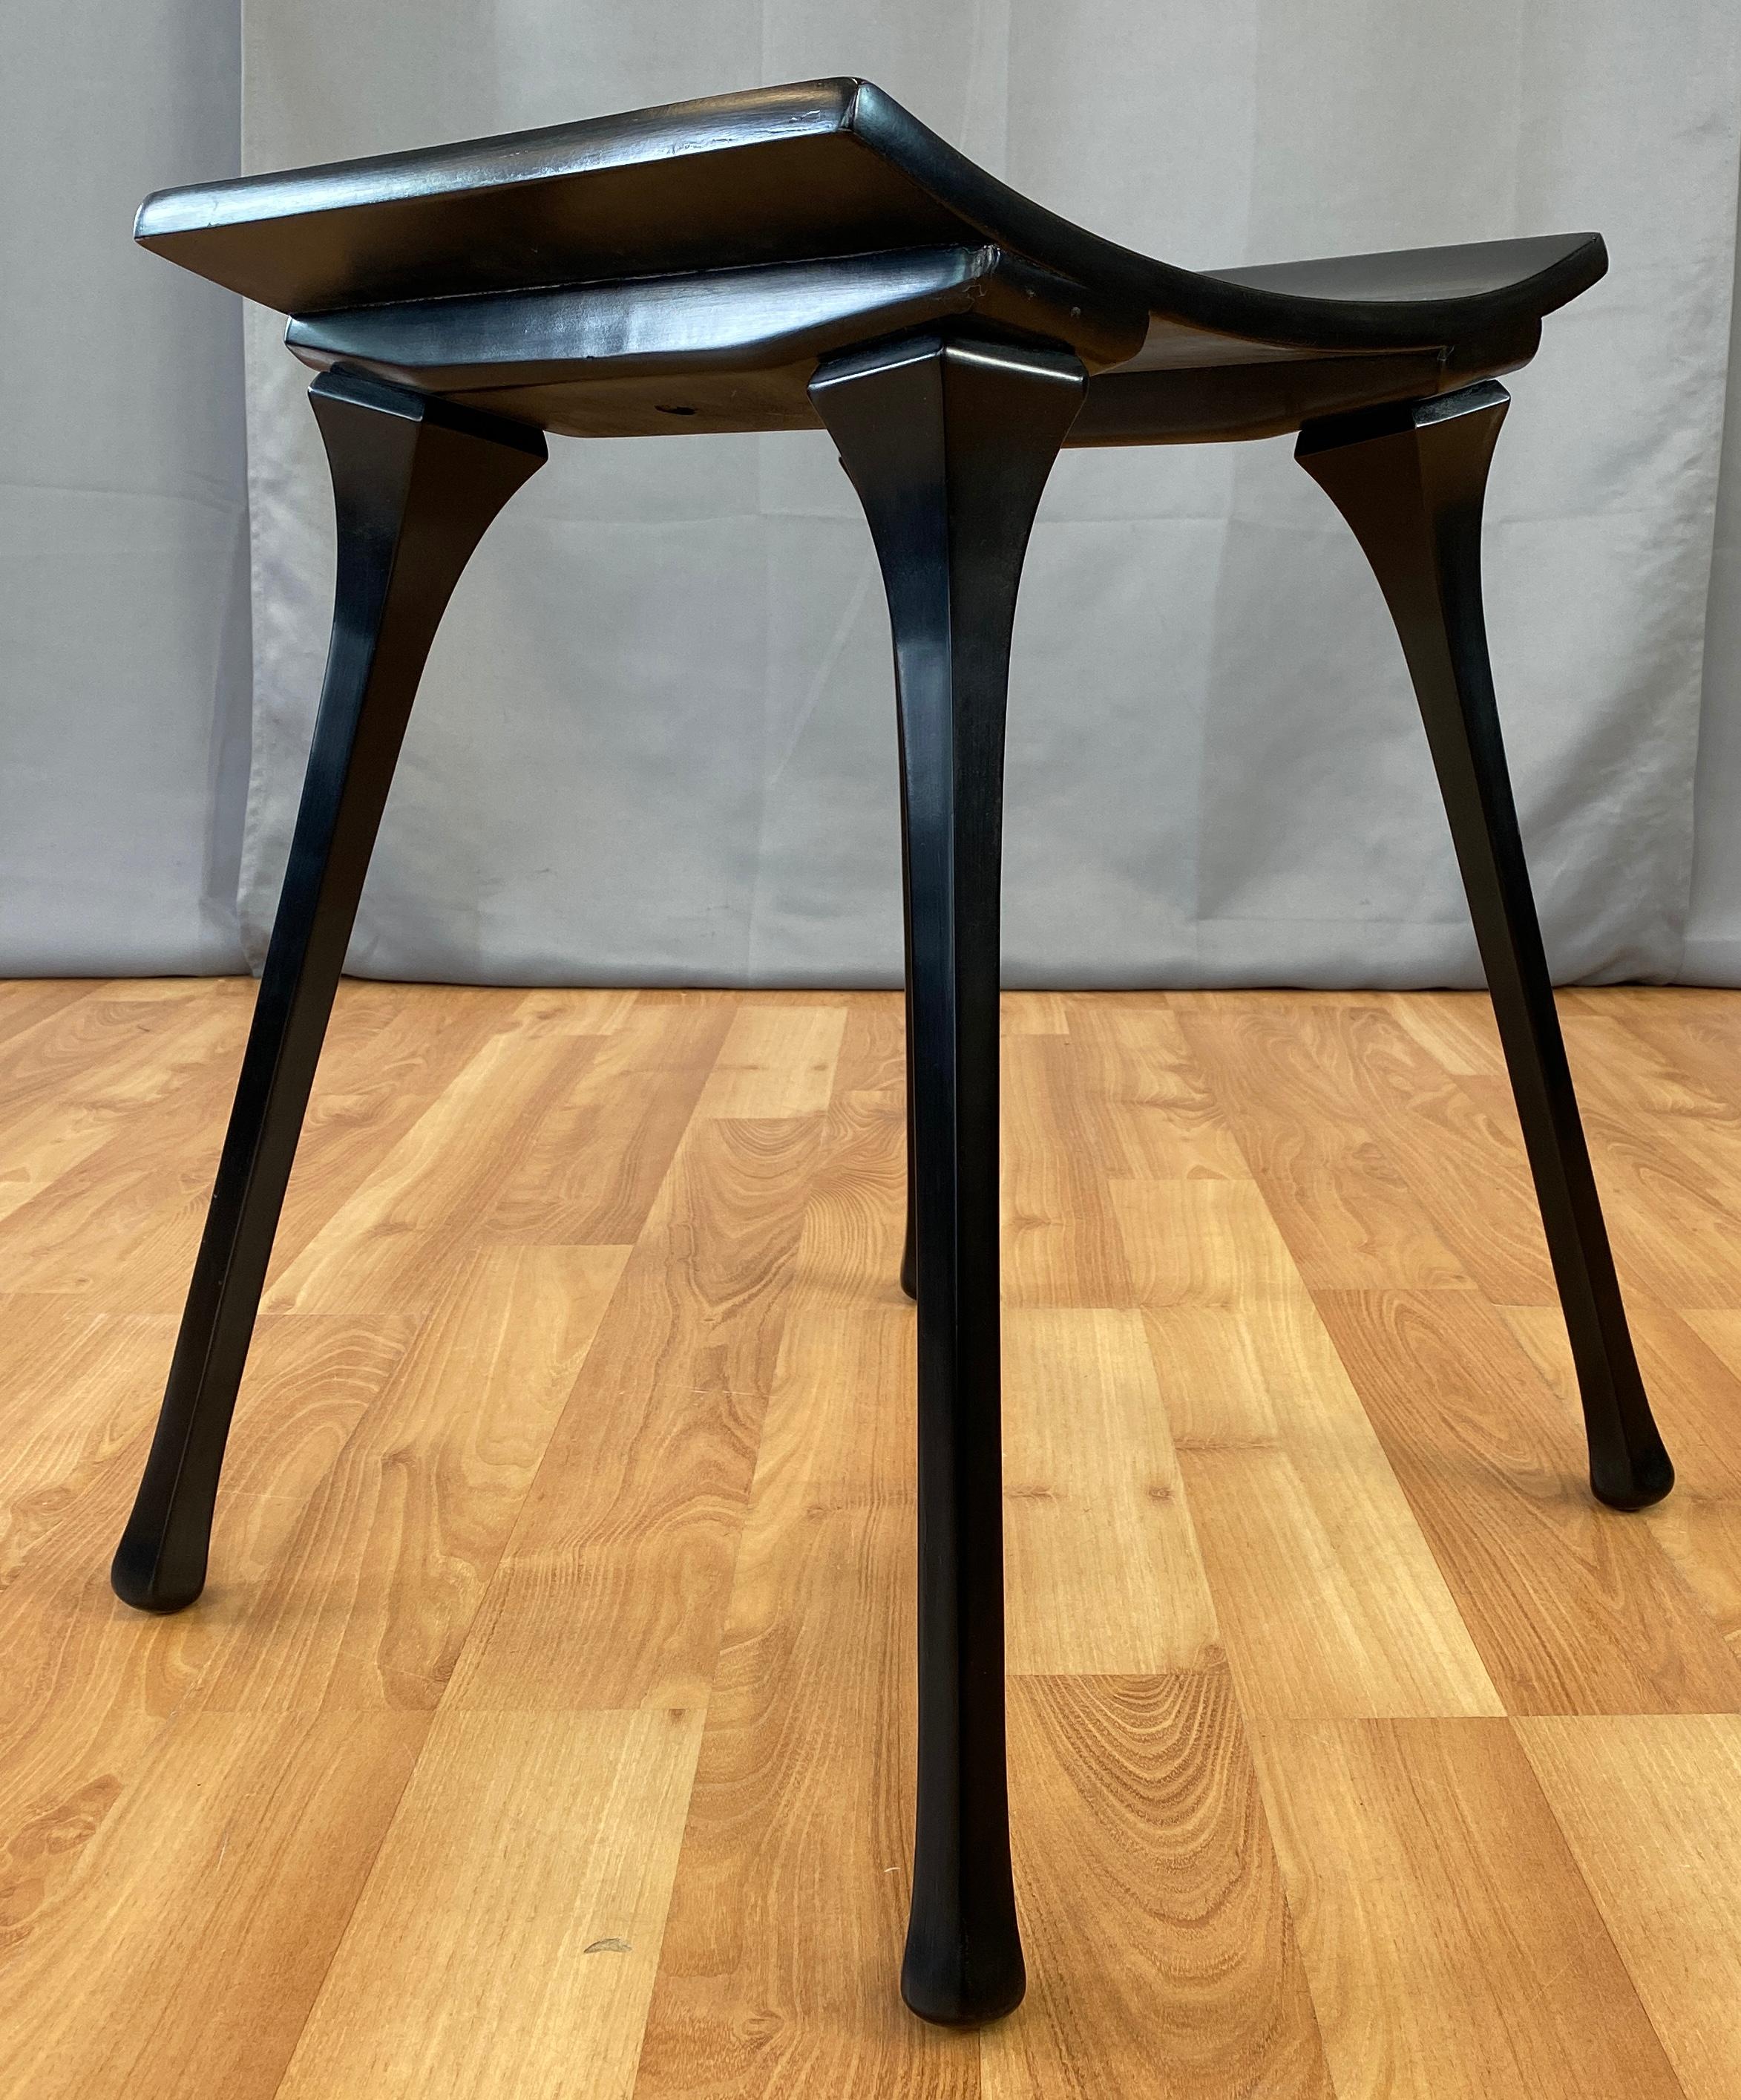 Mid-20th Century Old School Glam Black Wooden Stool circa 1940s/50s For Sale